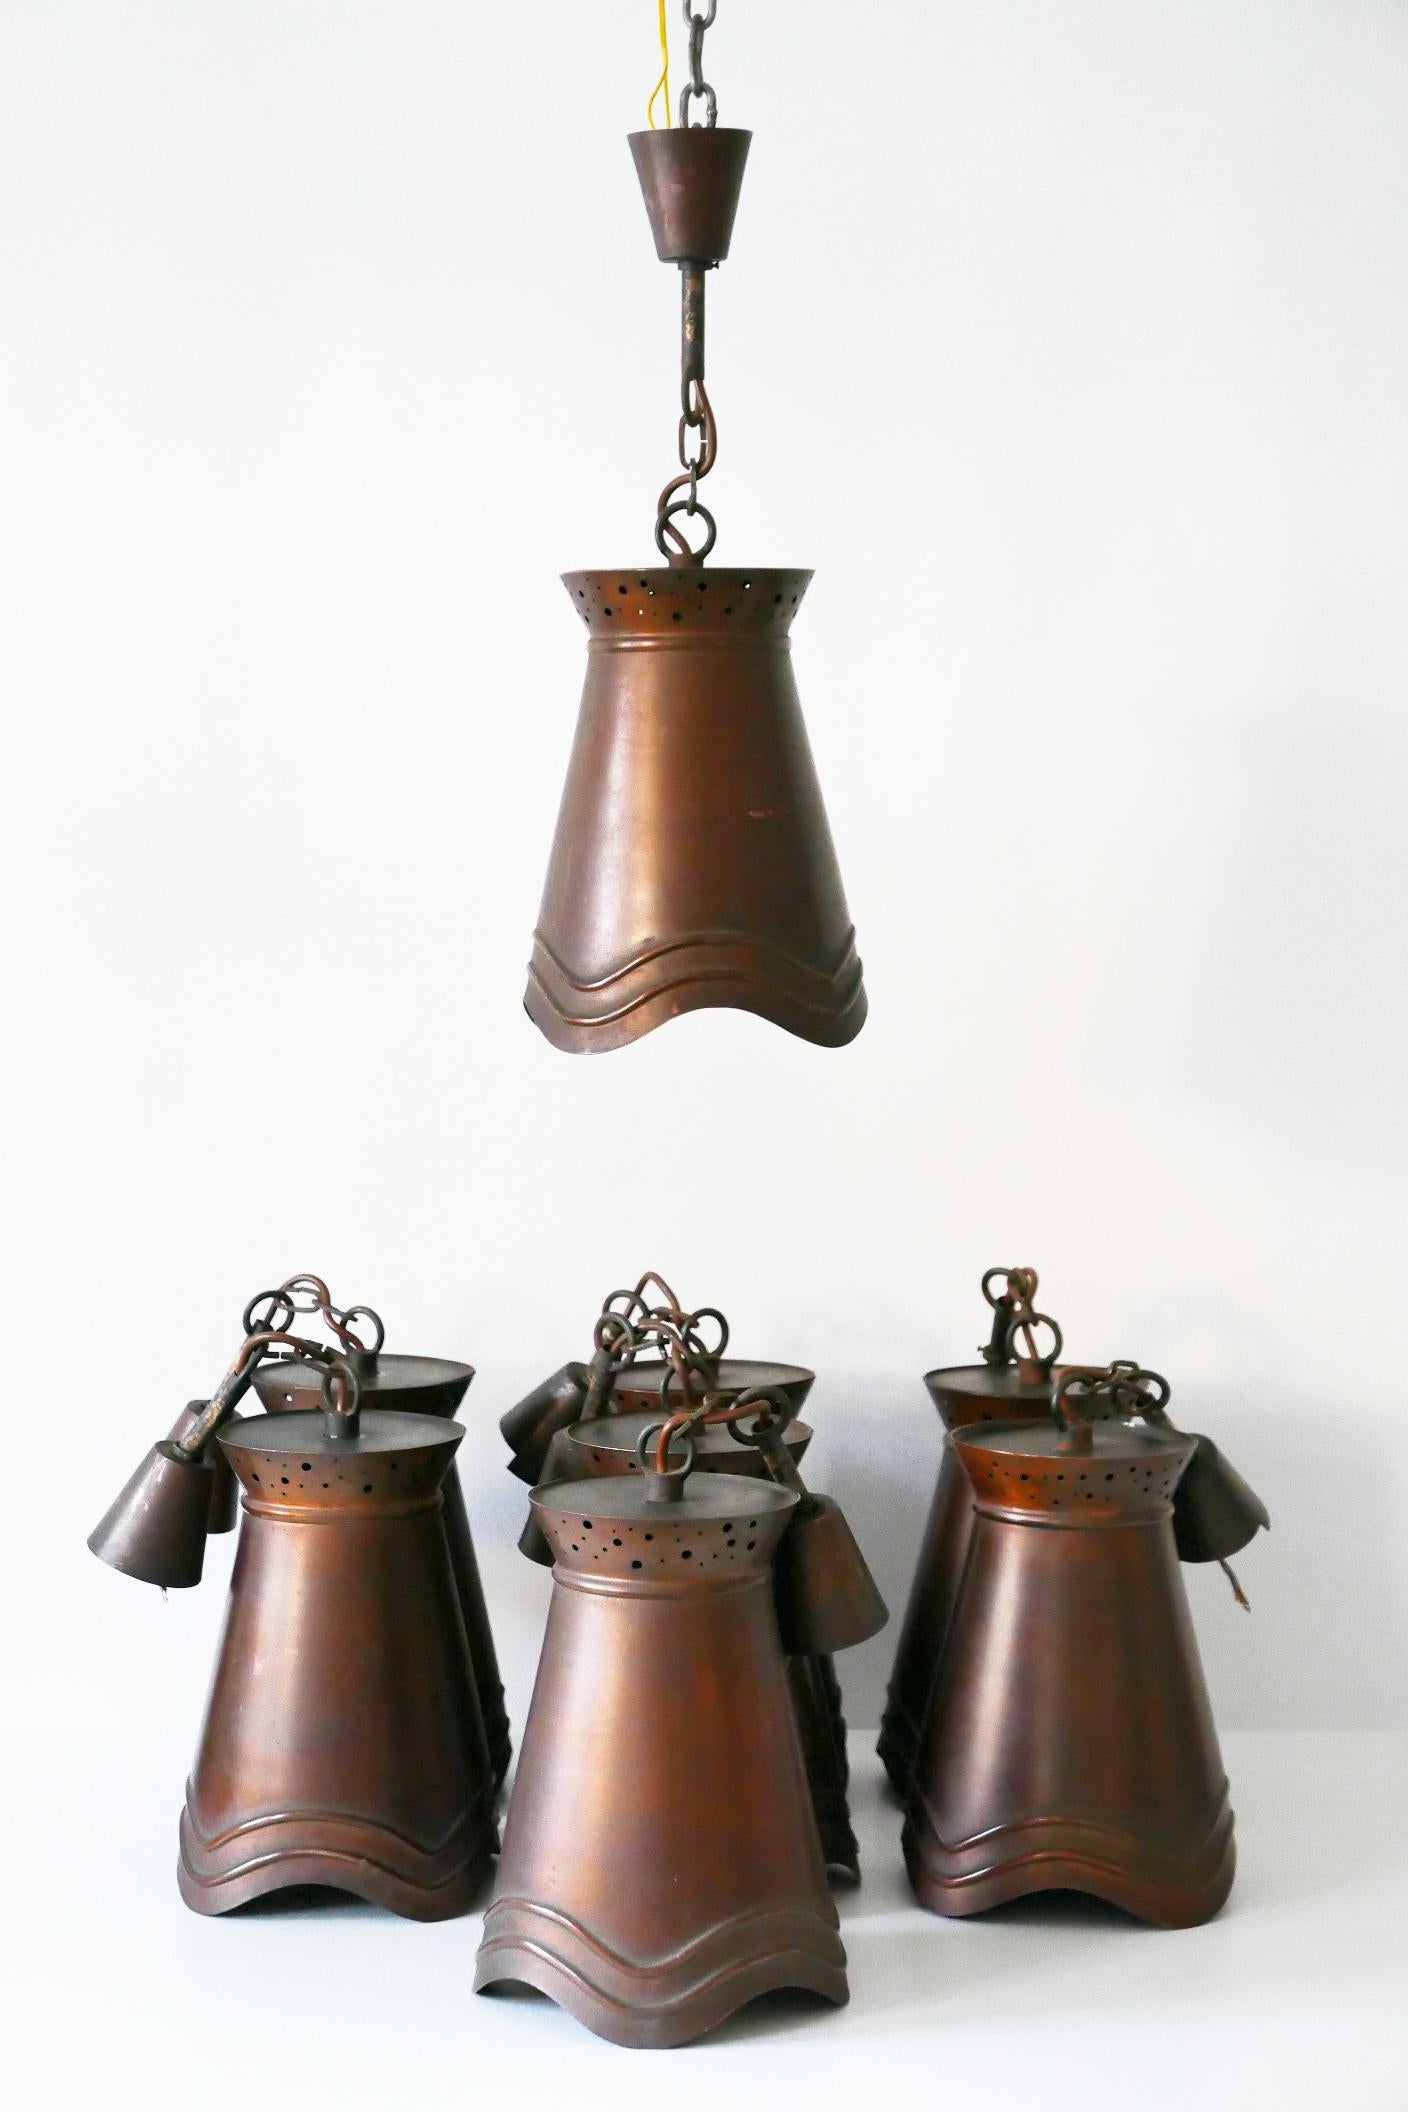 Mid-Century Modern Copper Pendant Lamps or Hanging Lights, Germany, 1950s For Sale 6